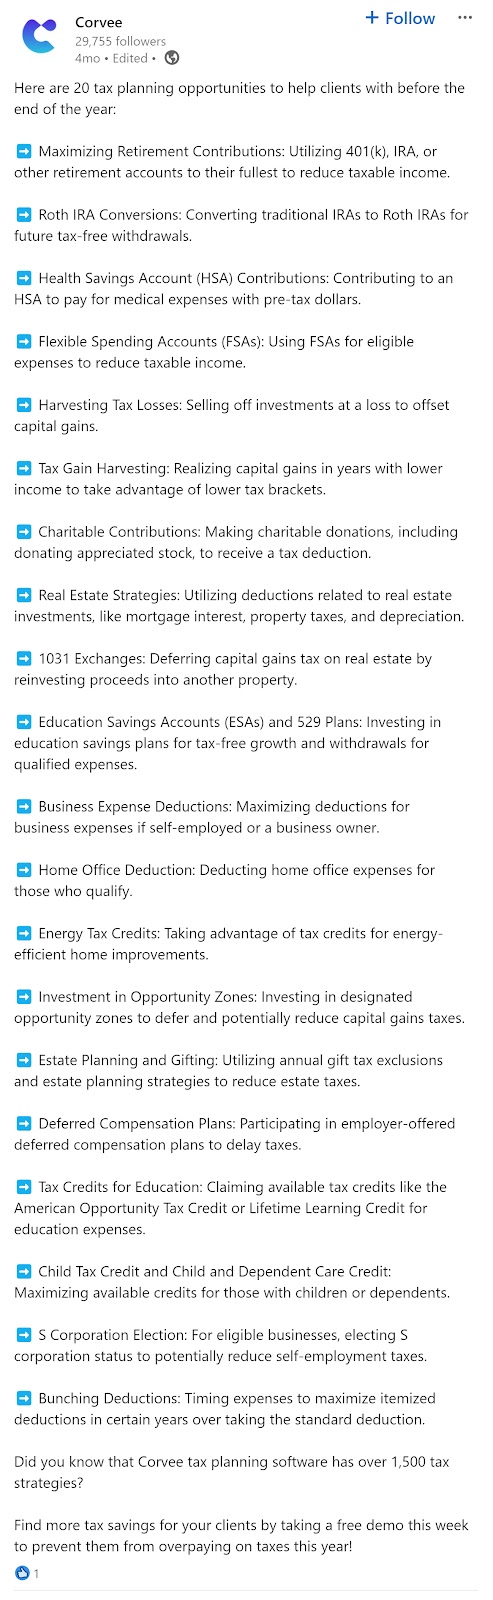 Corvee's social media post with a list of helpful tax planning opportunities